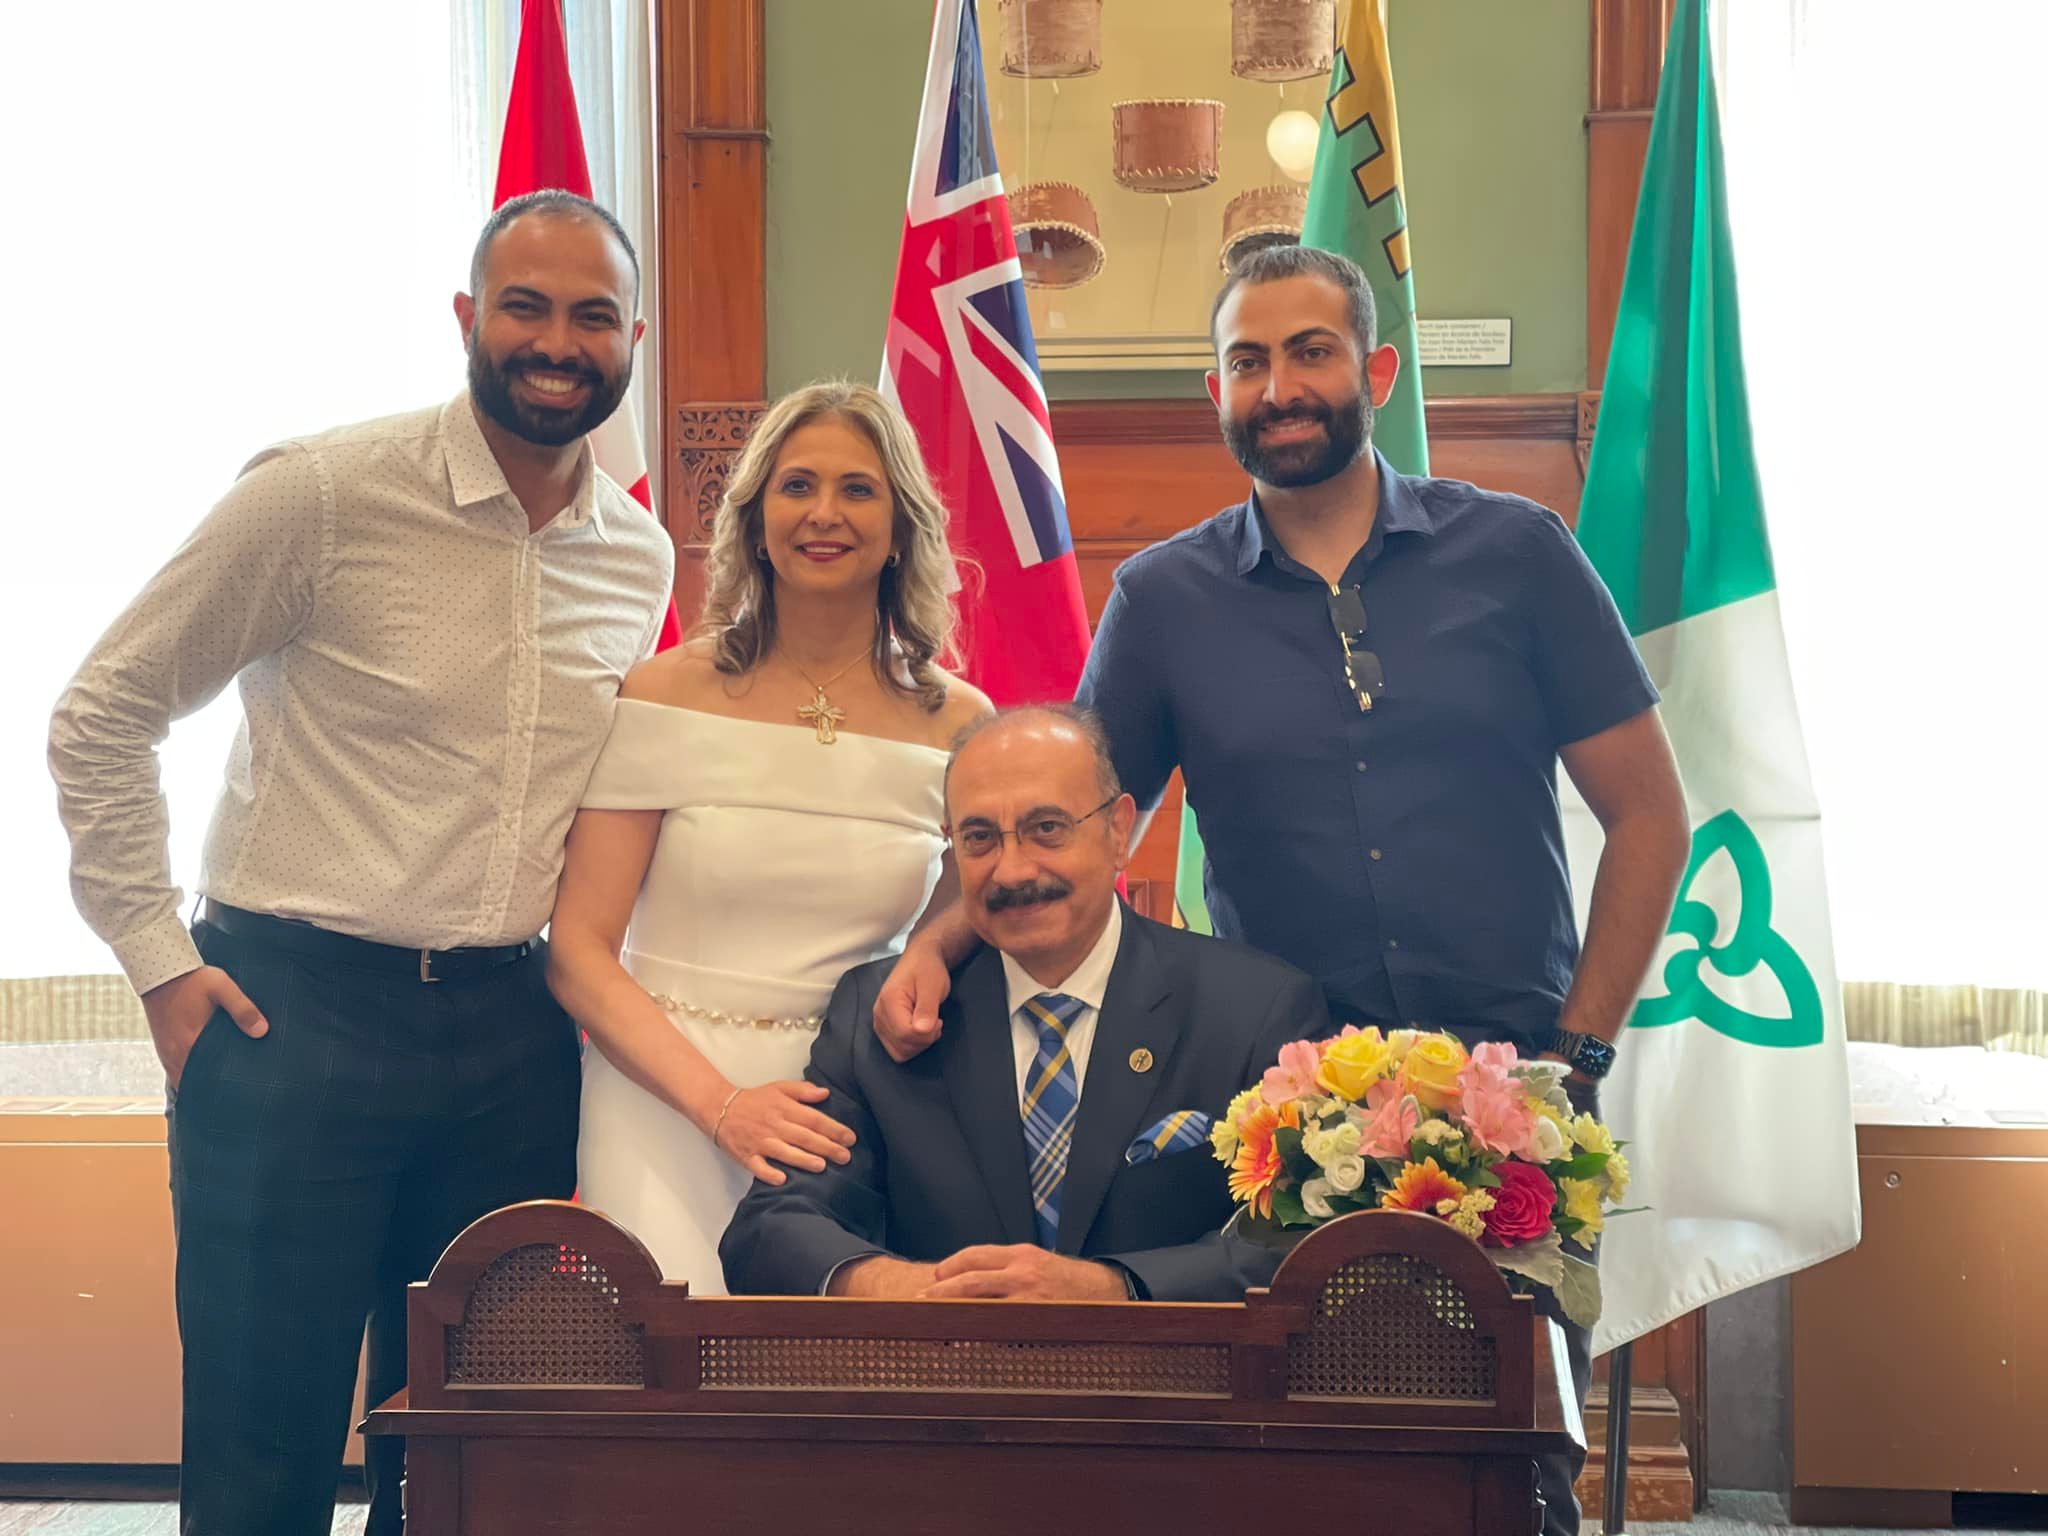 Sheref Sabawy, Dr. Mary Sabawy, and their two sons at the Legislative Assembly of Ontario